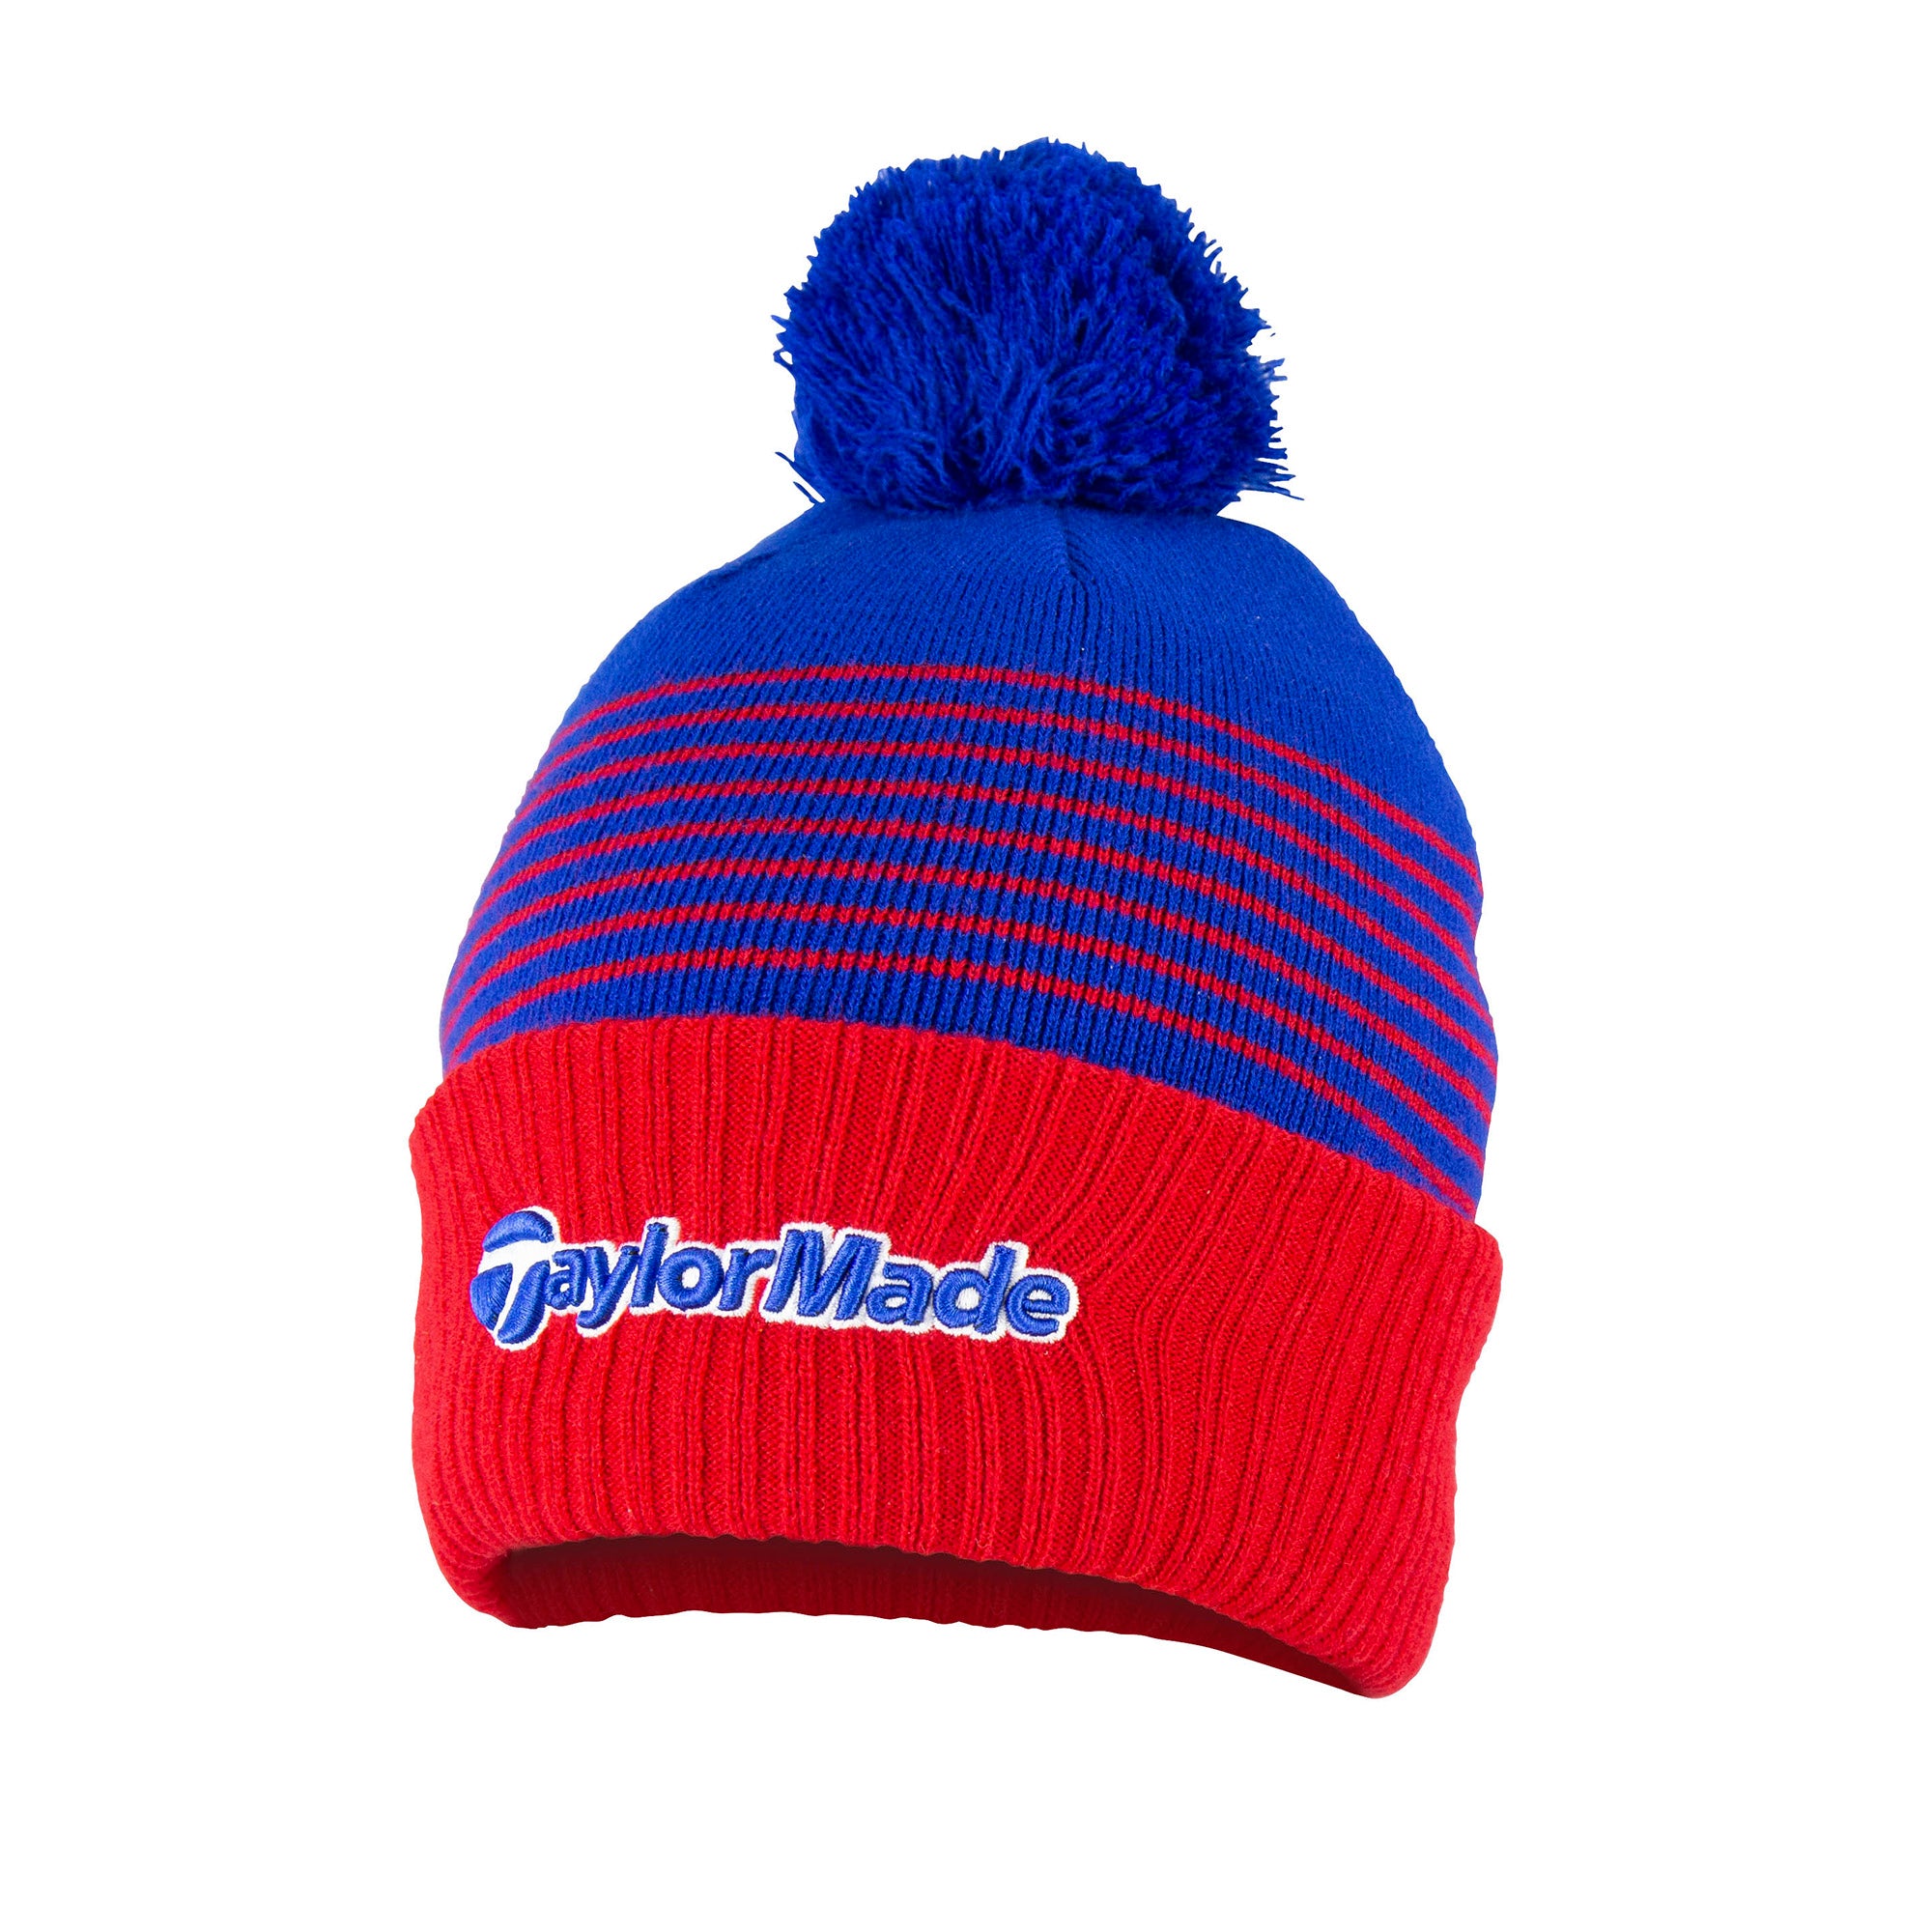 TaylorMade Golf Bobble Beanie Hat